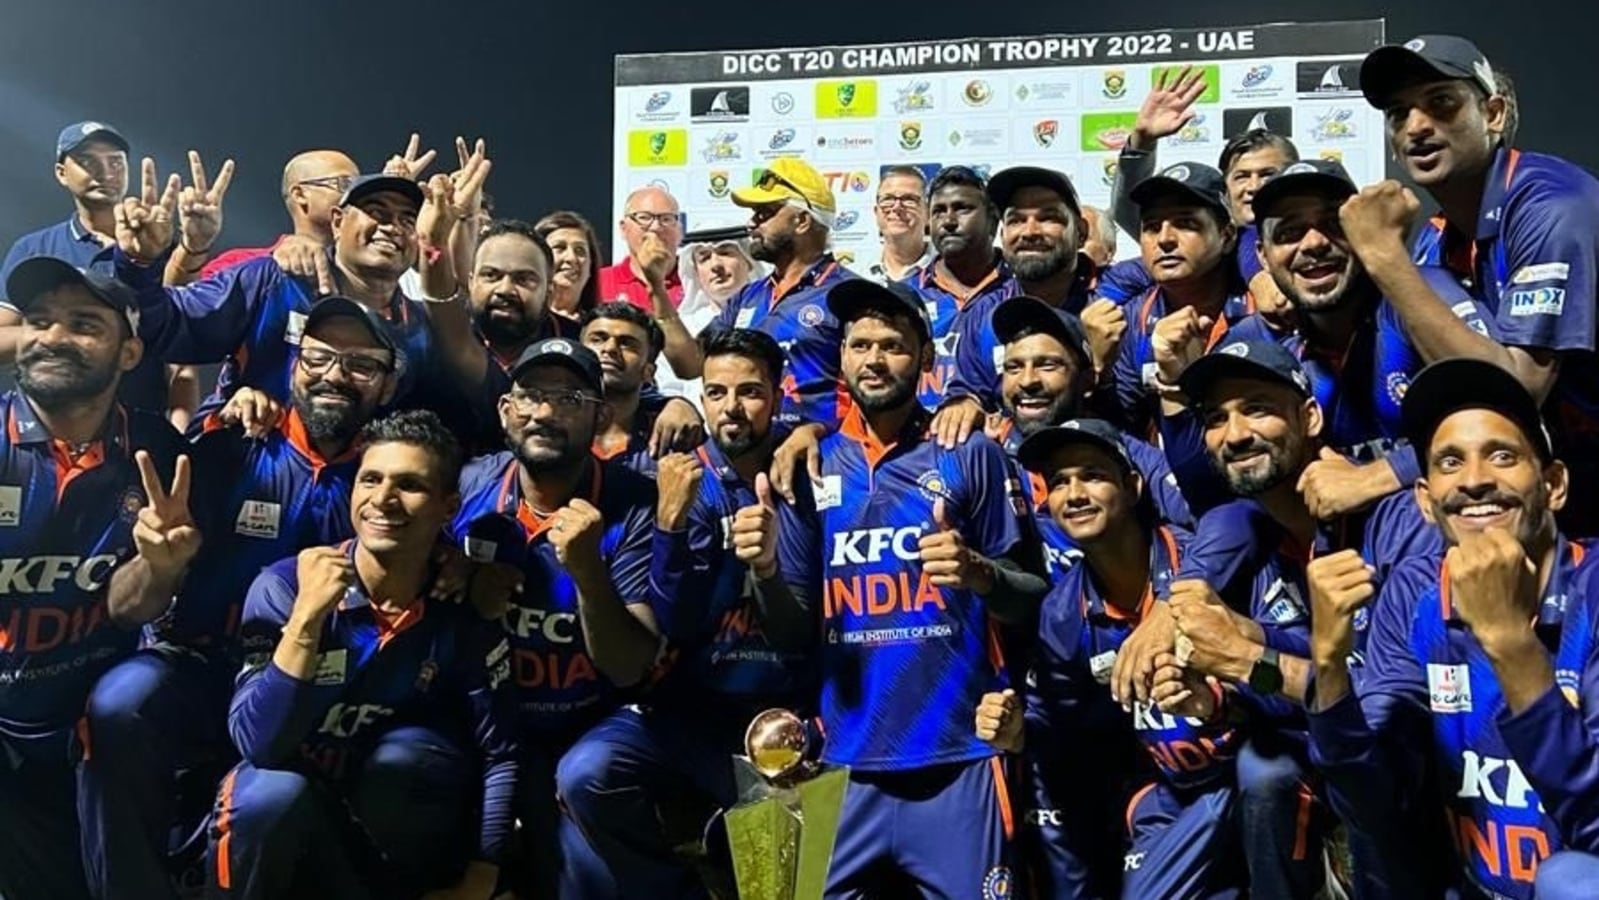 india-beat-south-africa-to-win-dicc-t20-champions-trophy-2022